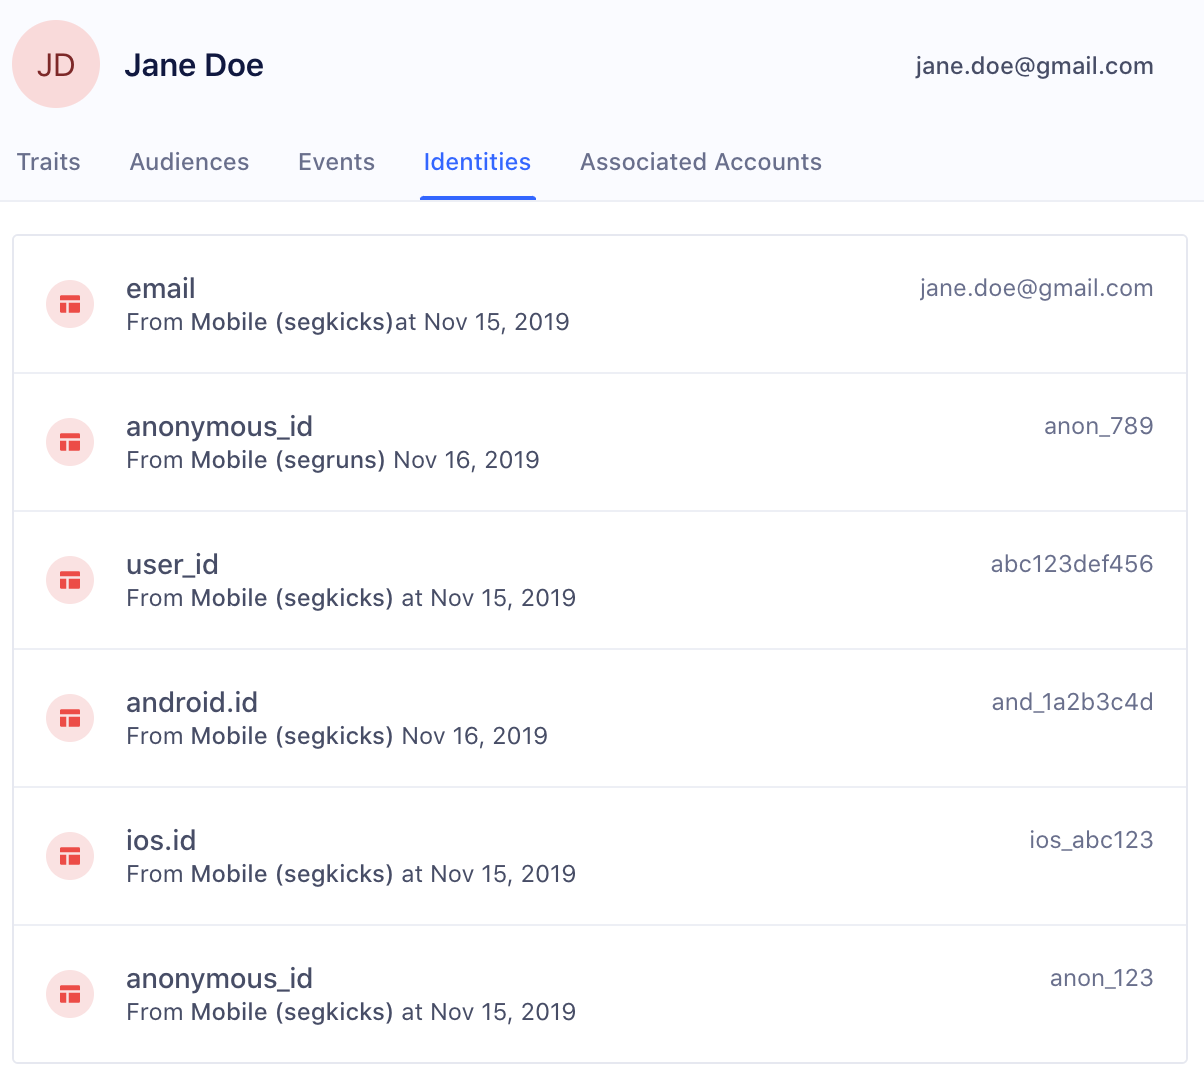 An additional anonymous_id added to Jane Doe's identifiers